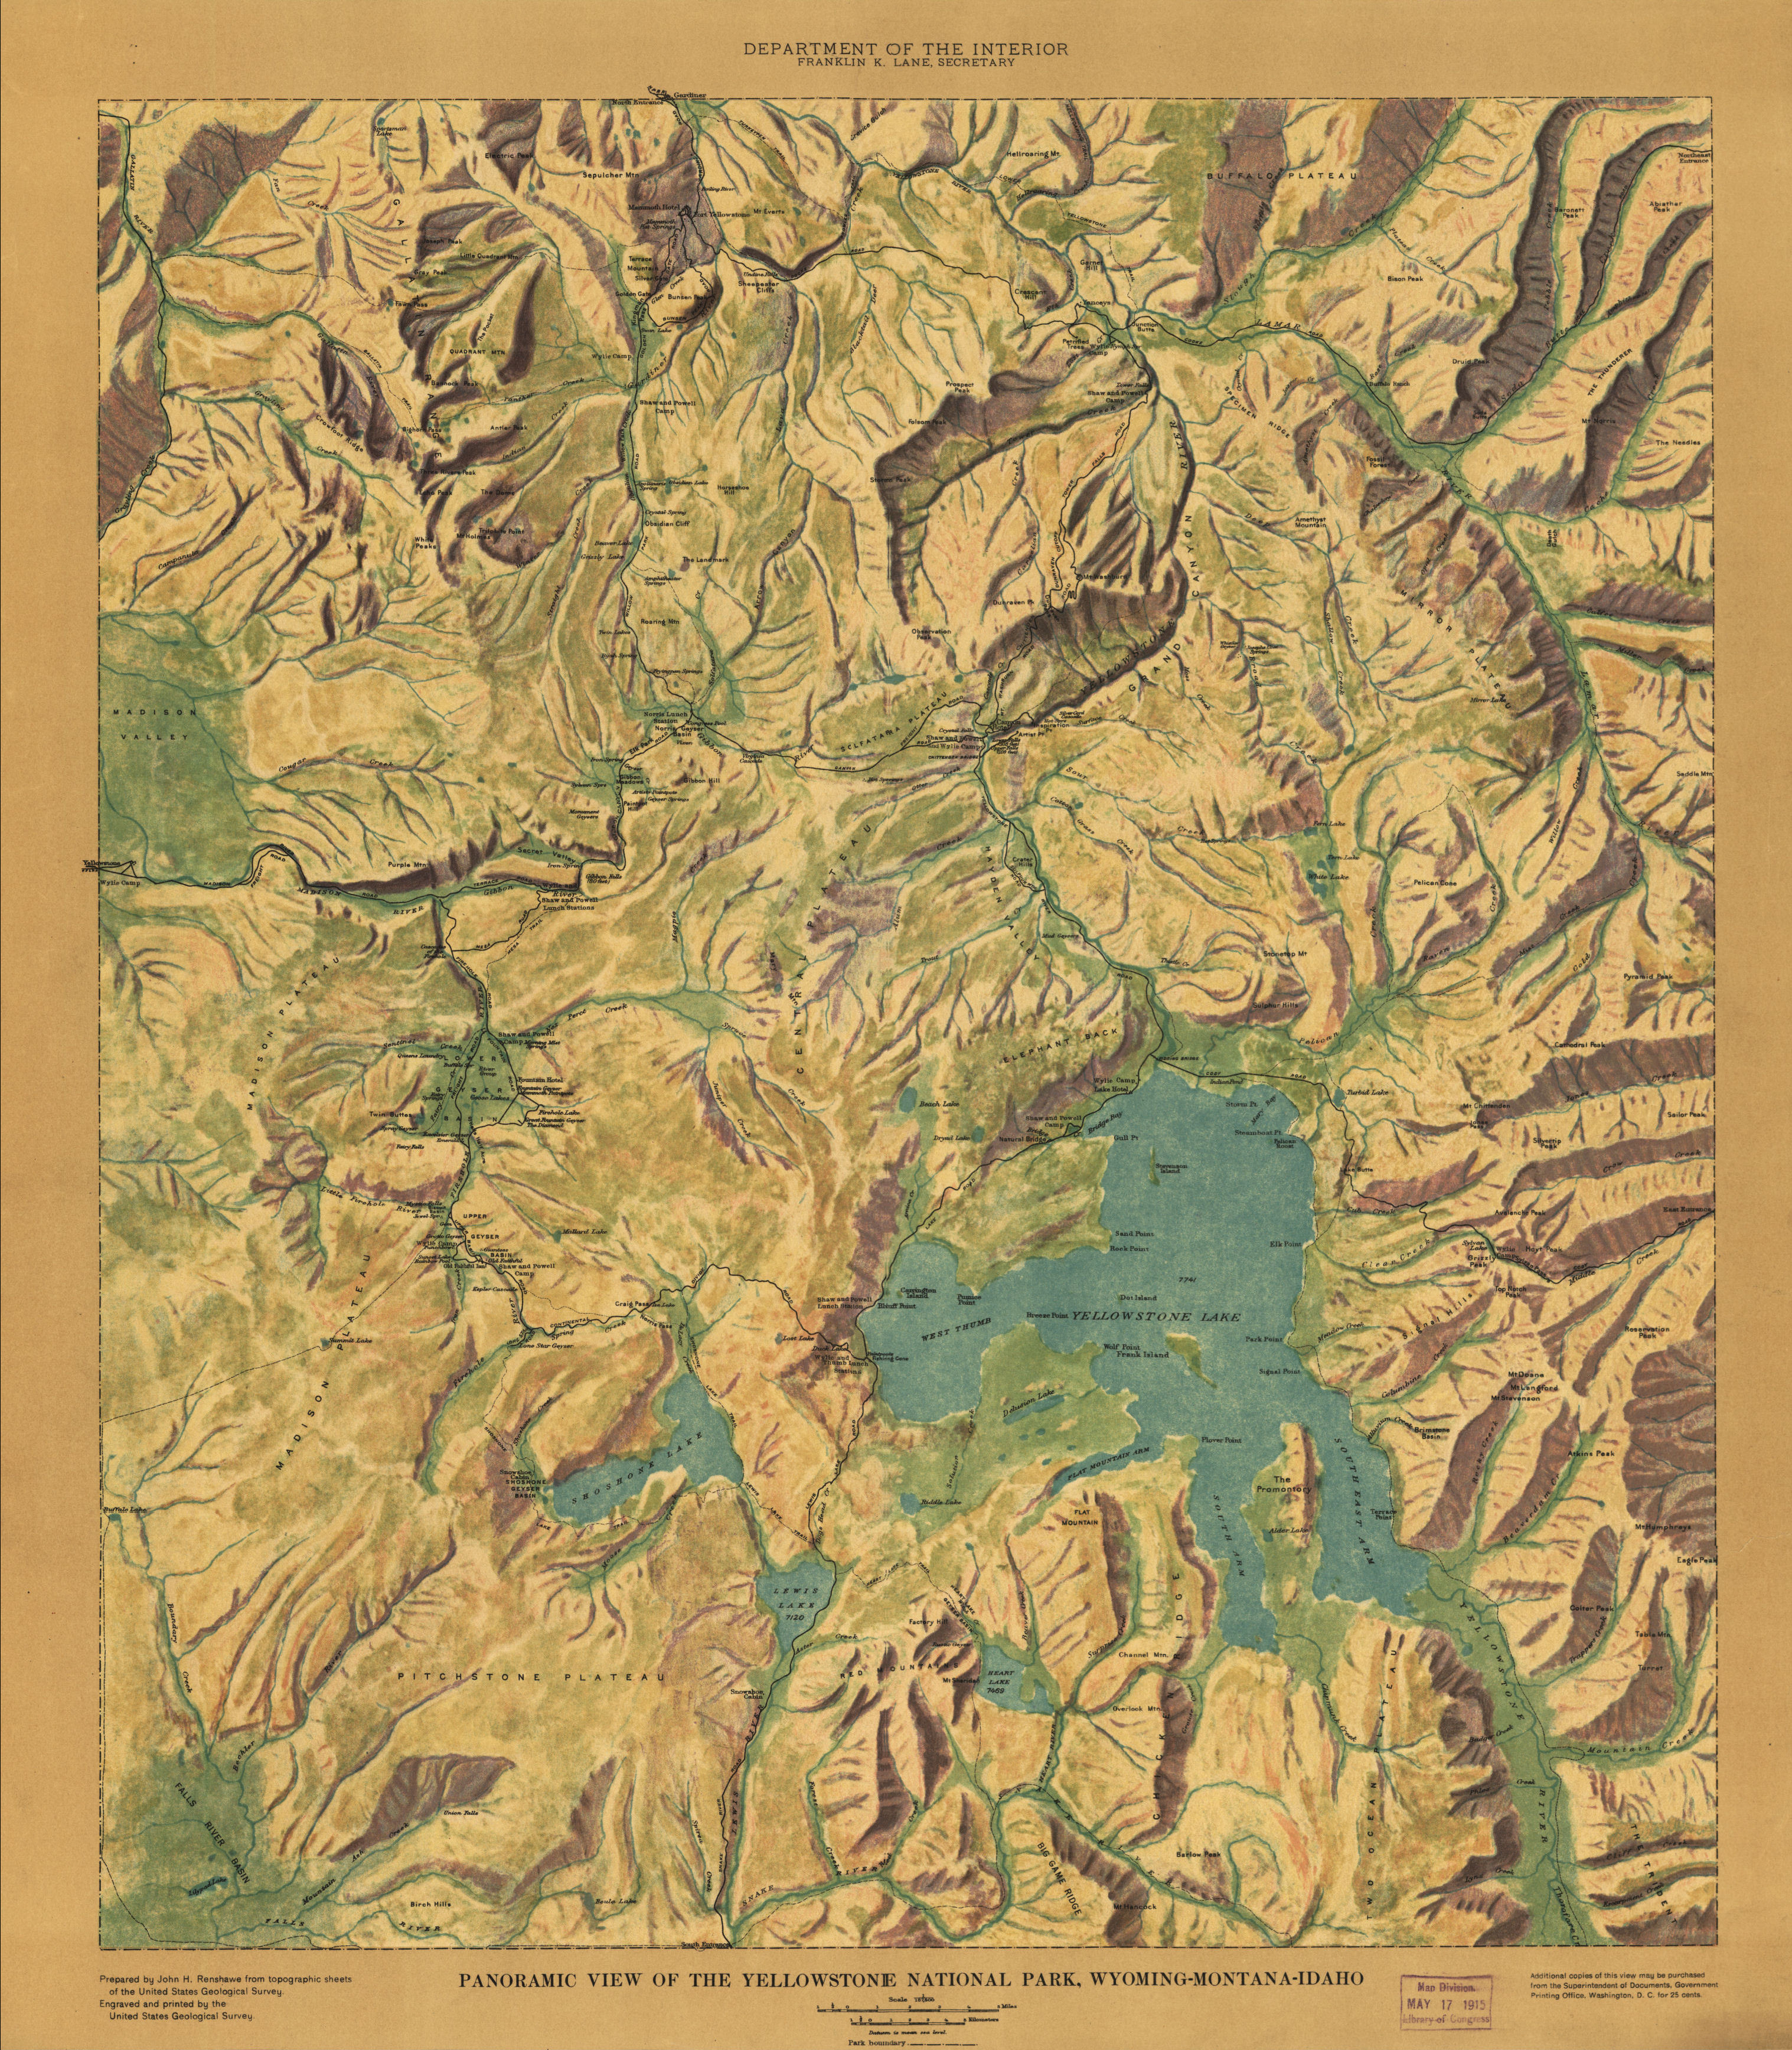 Yellowstone National Park Panoramic Map from the Library of Congress Collection